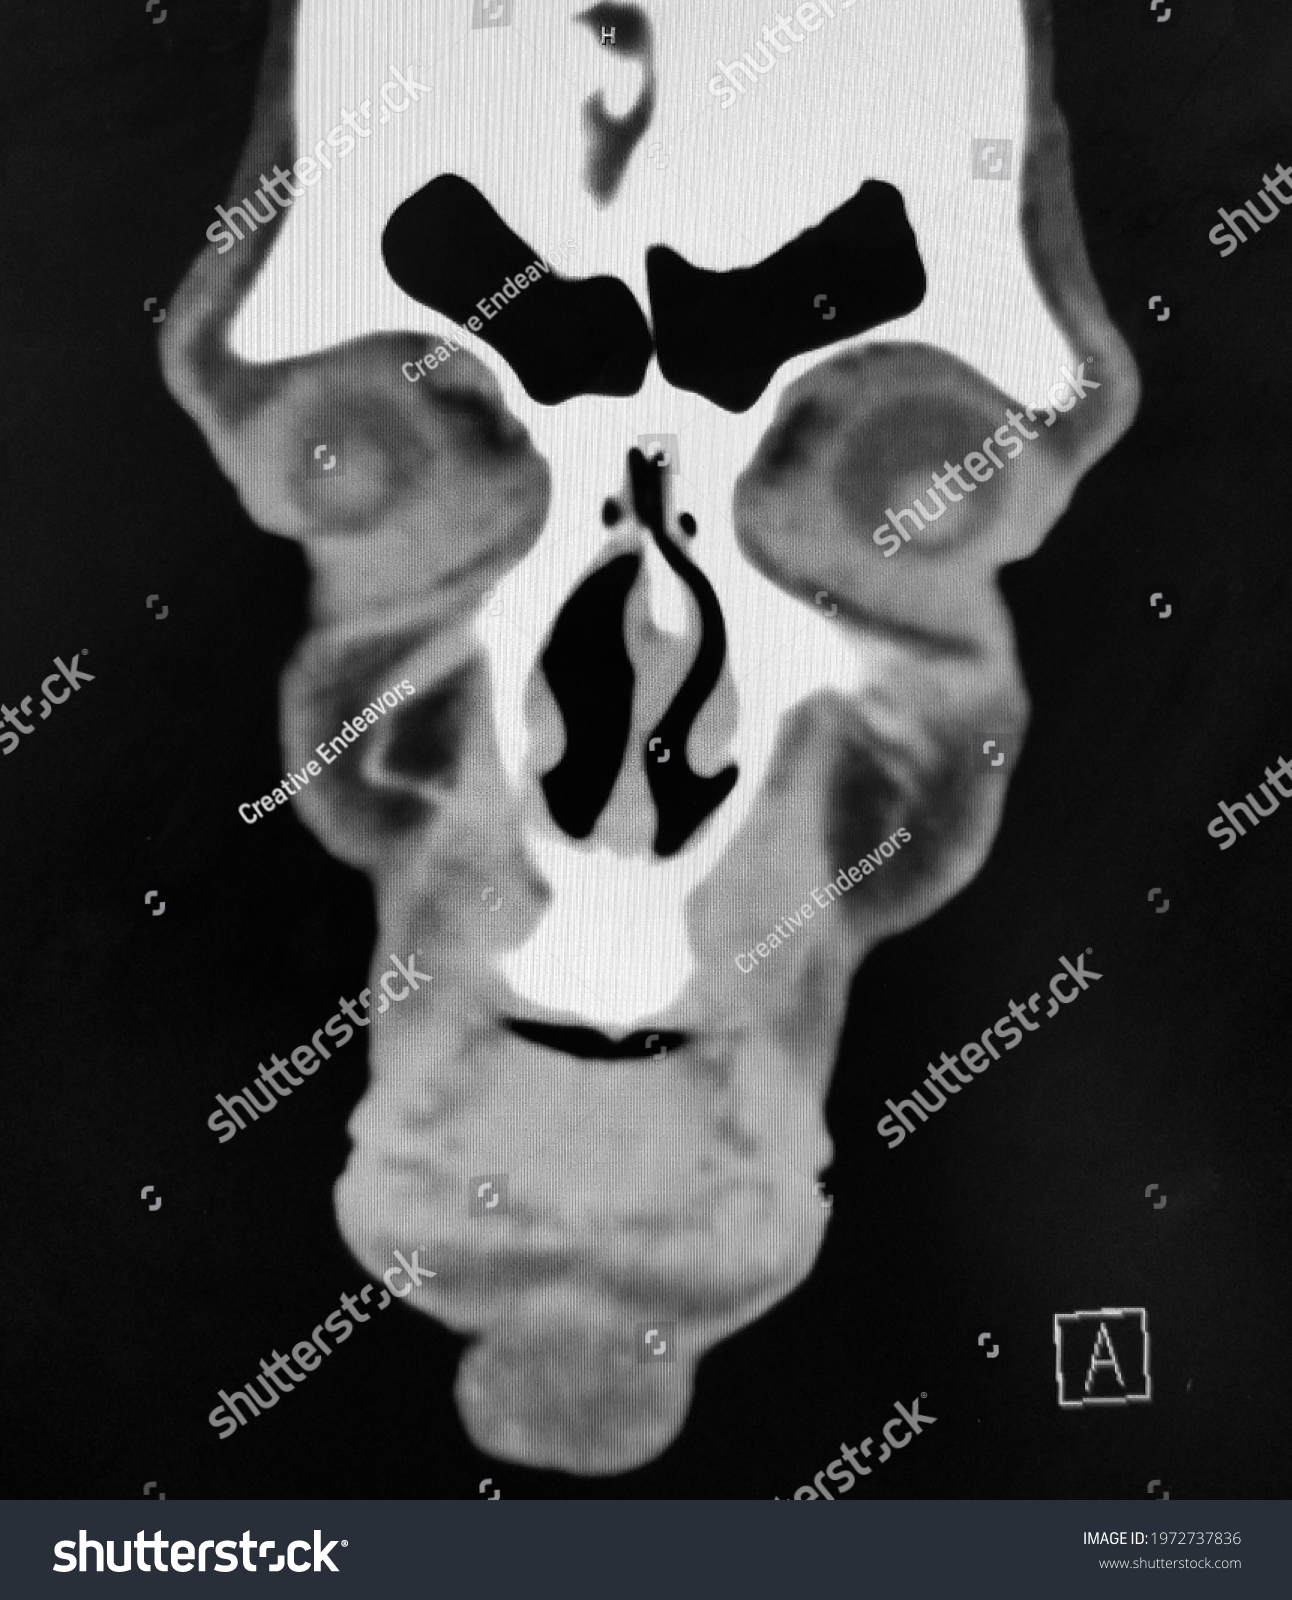 Coronal Ct Scan Sinuses Face Stock Photo 1972737836 | Shutterstock